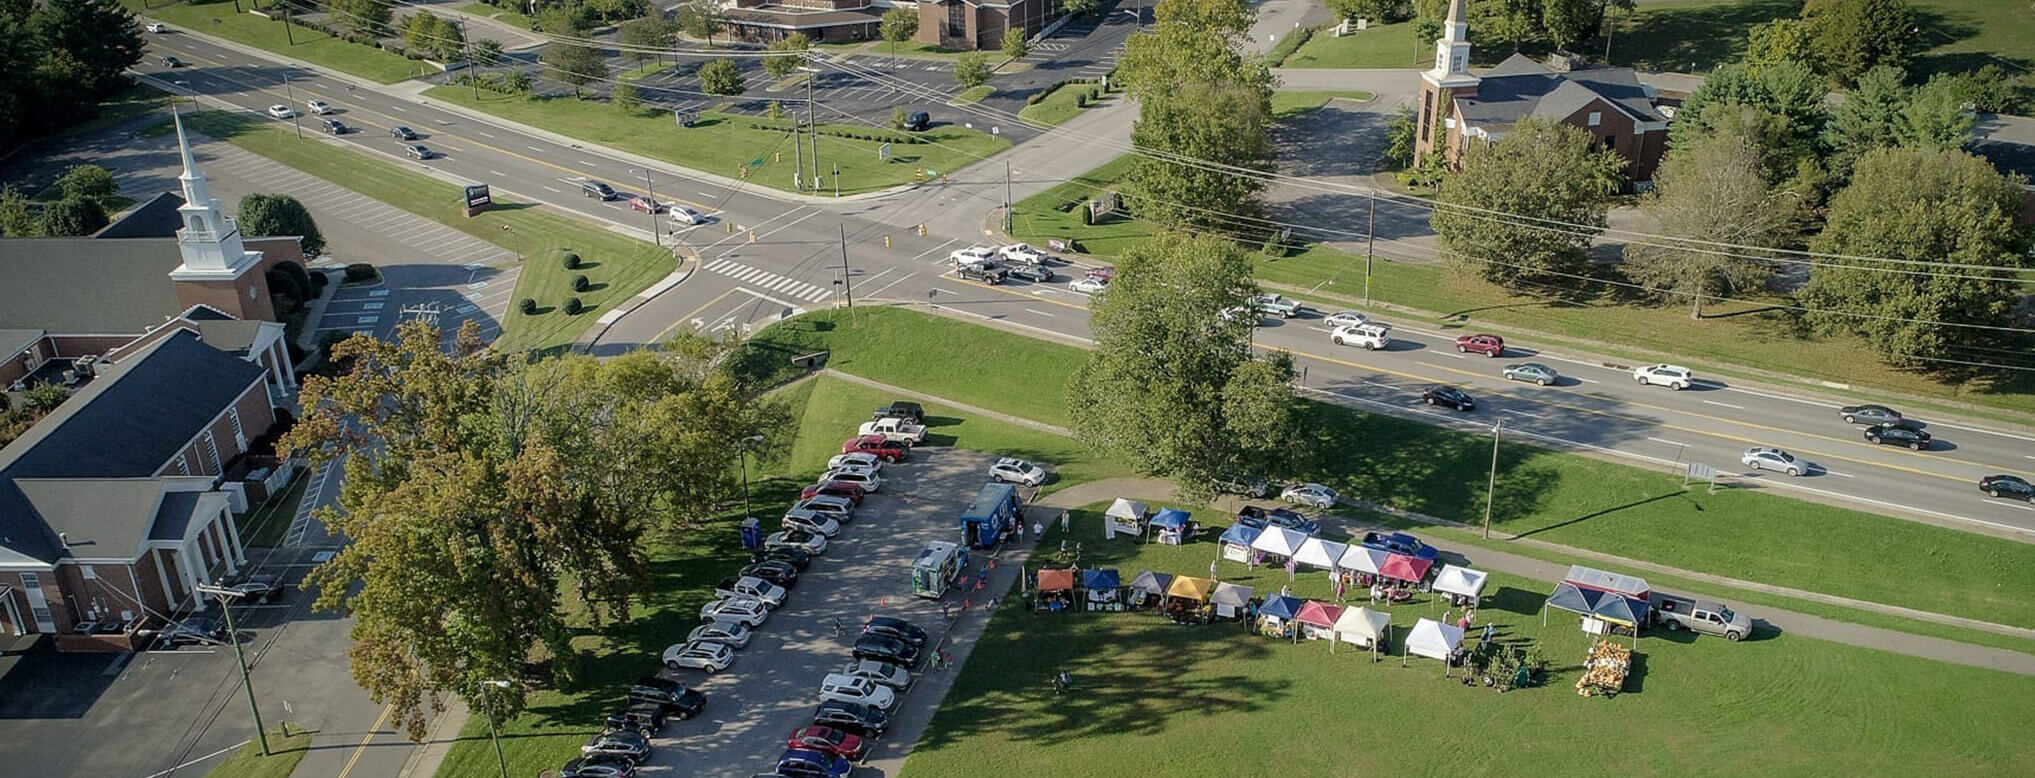 aerial of tents